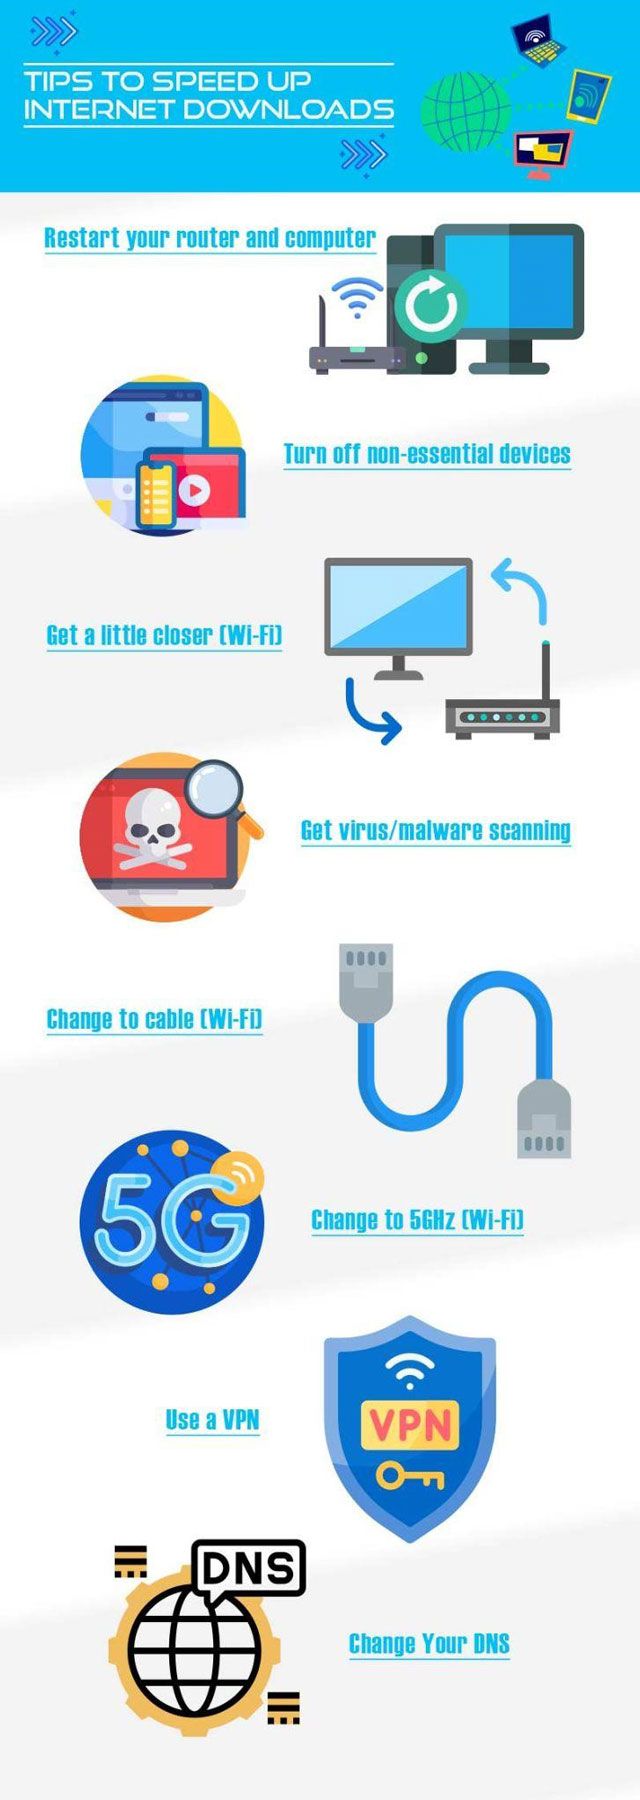 Tips to speed up Internet downloads